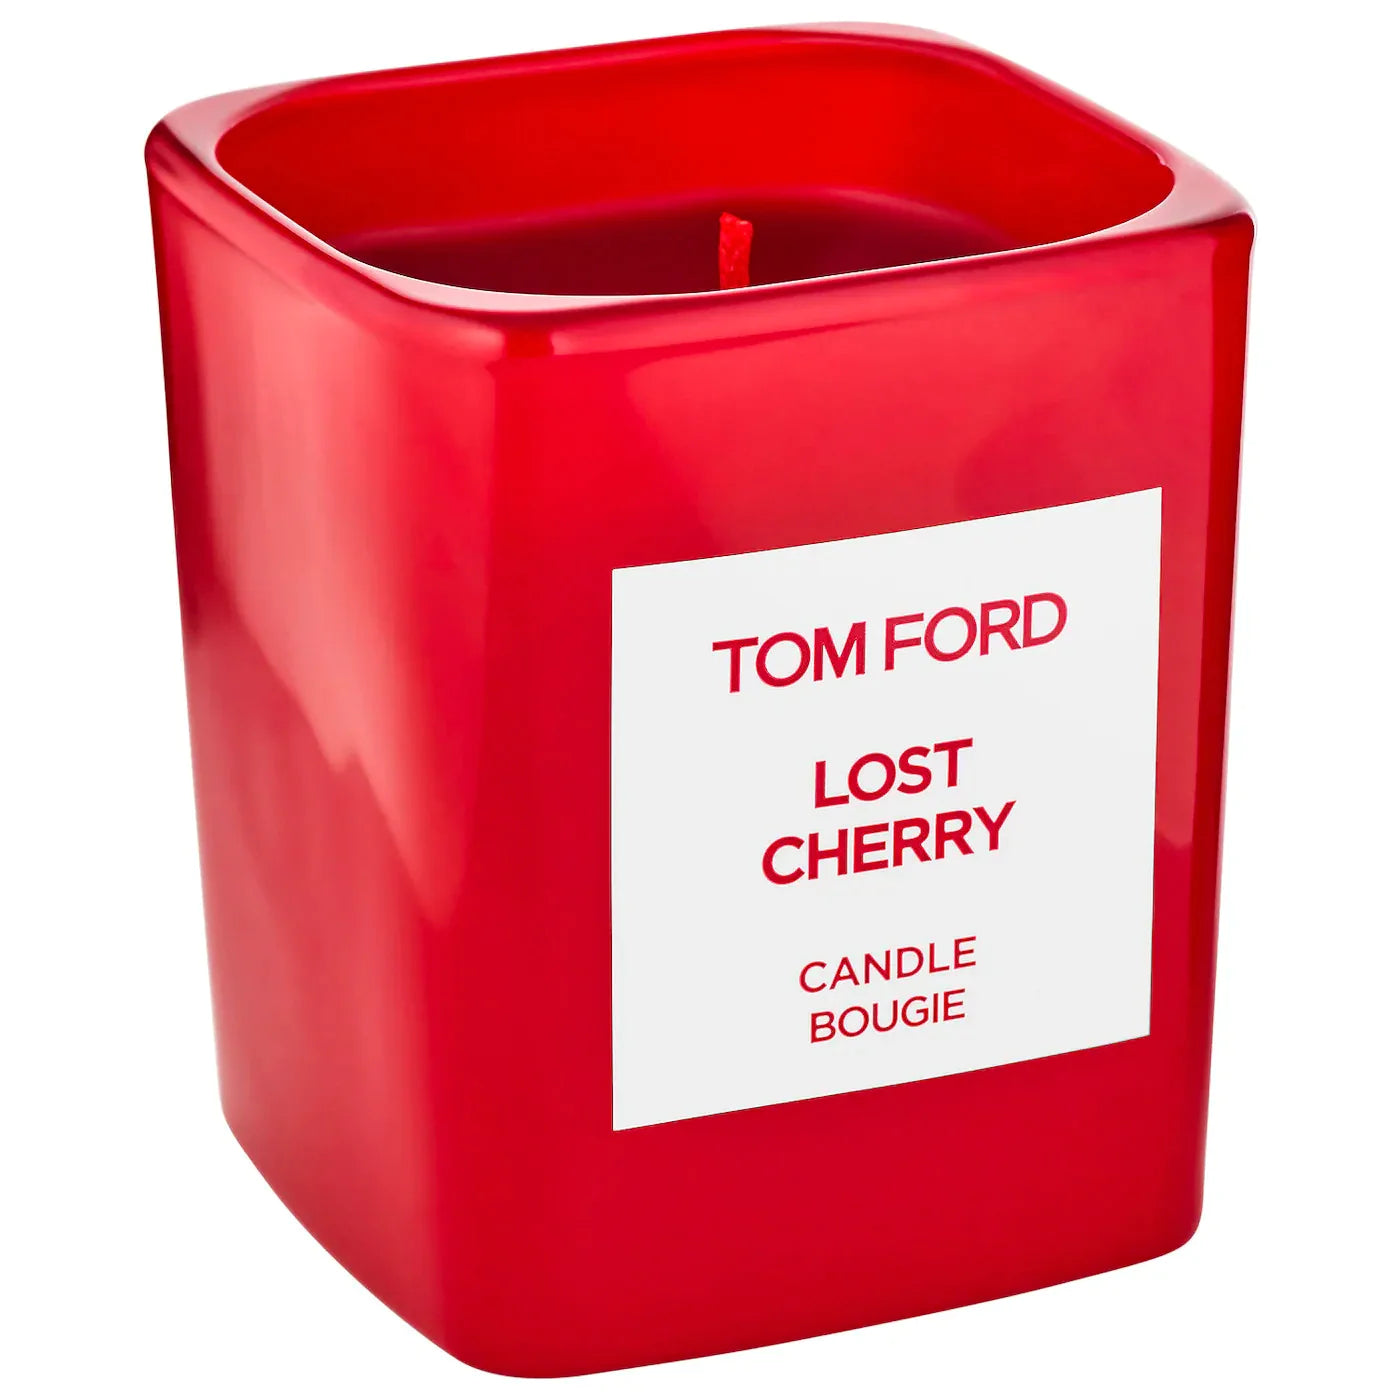 Lost Cherry Candle